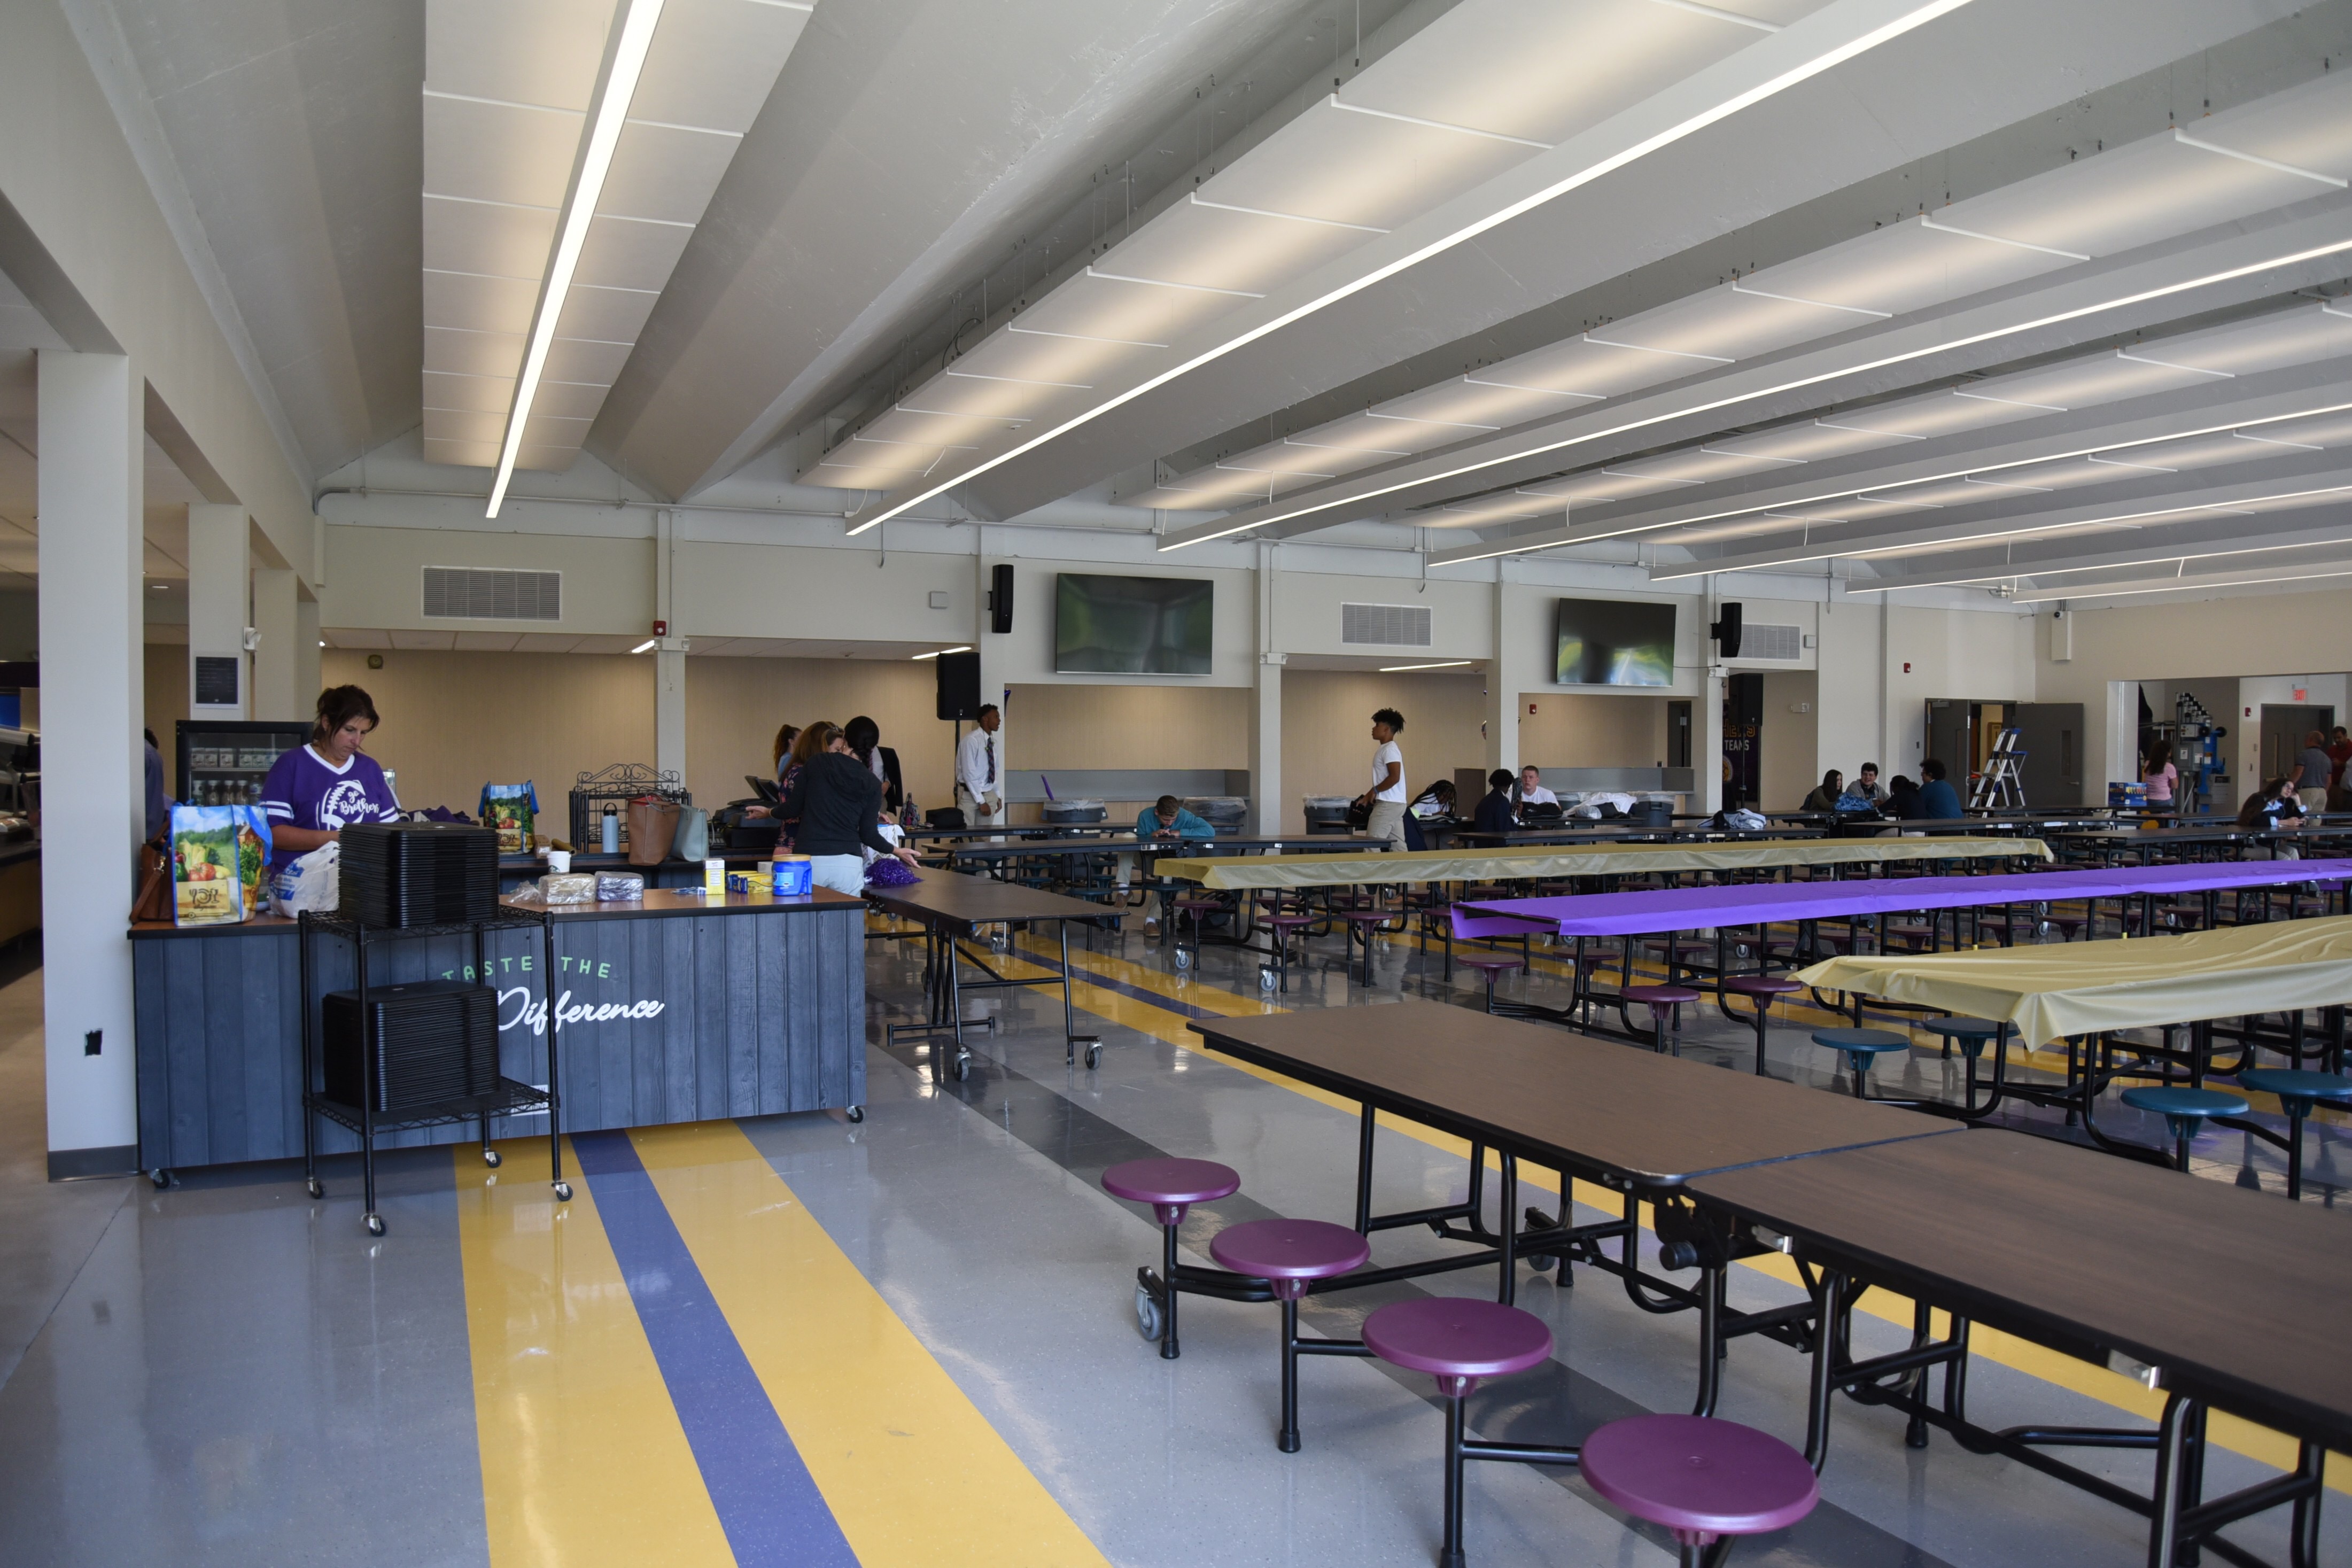 Dining Center after construction (of lunch line)